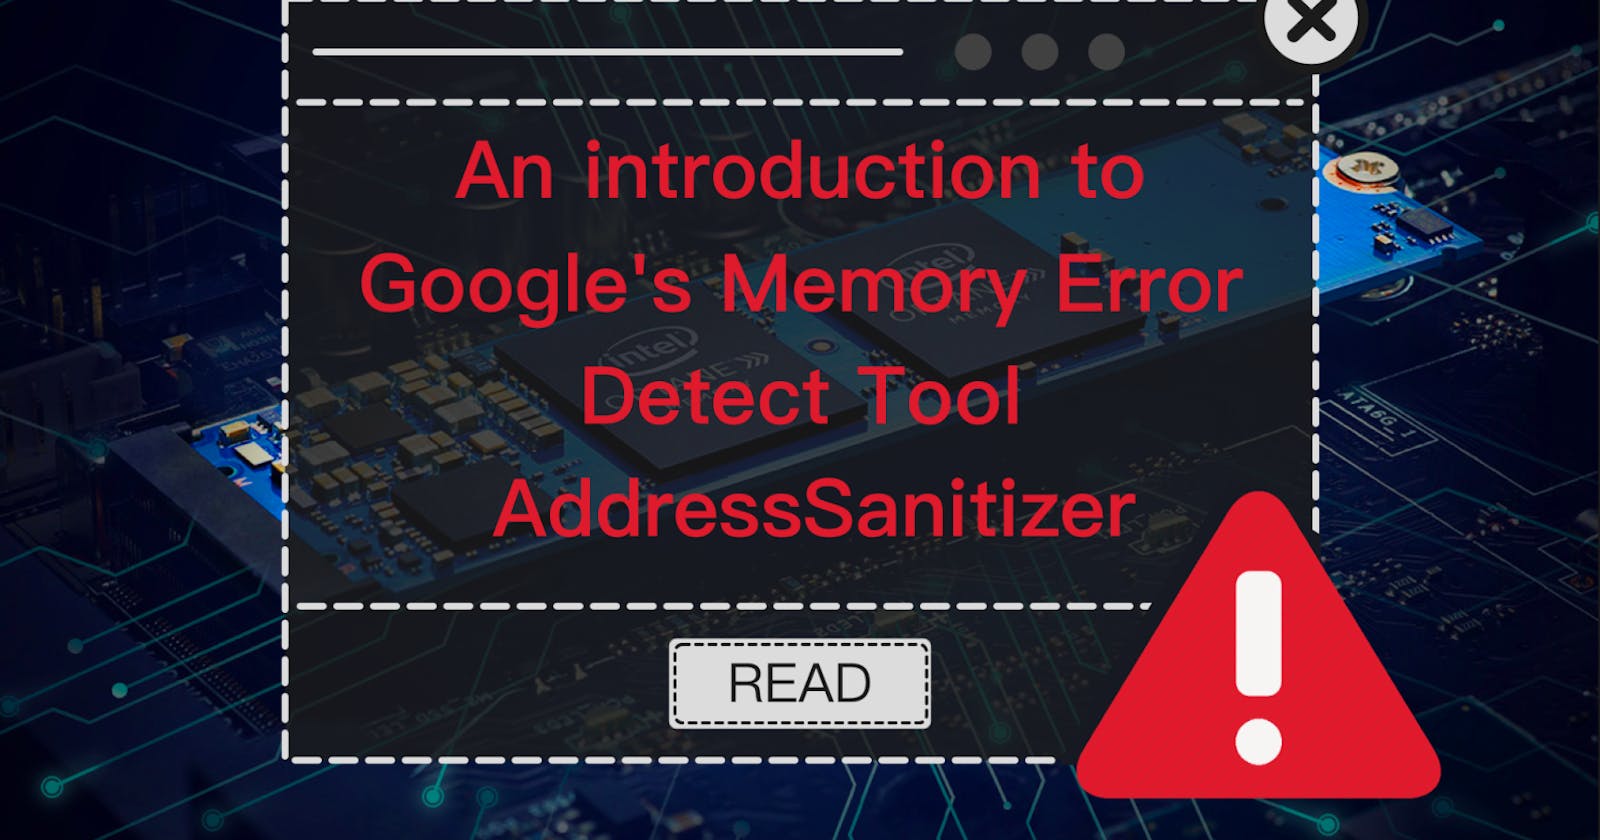 An Introduction to Google’s Memory Error Detect Tool AddressSanitizer